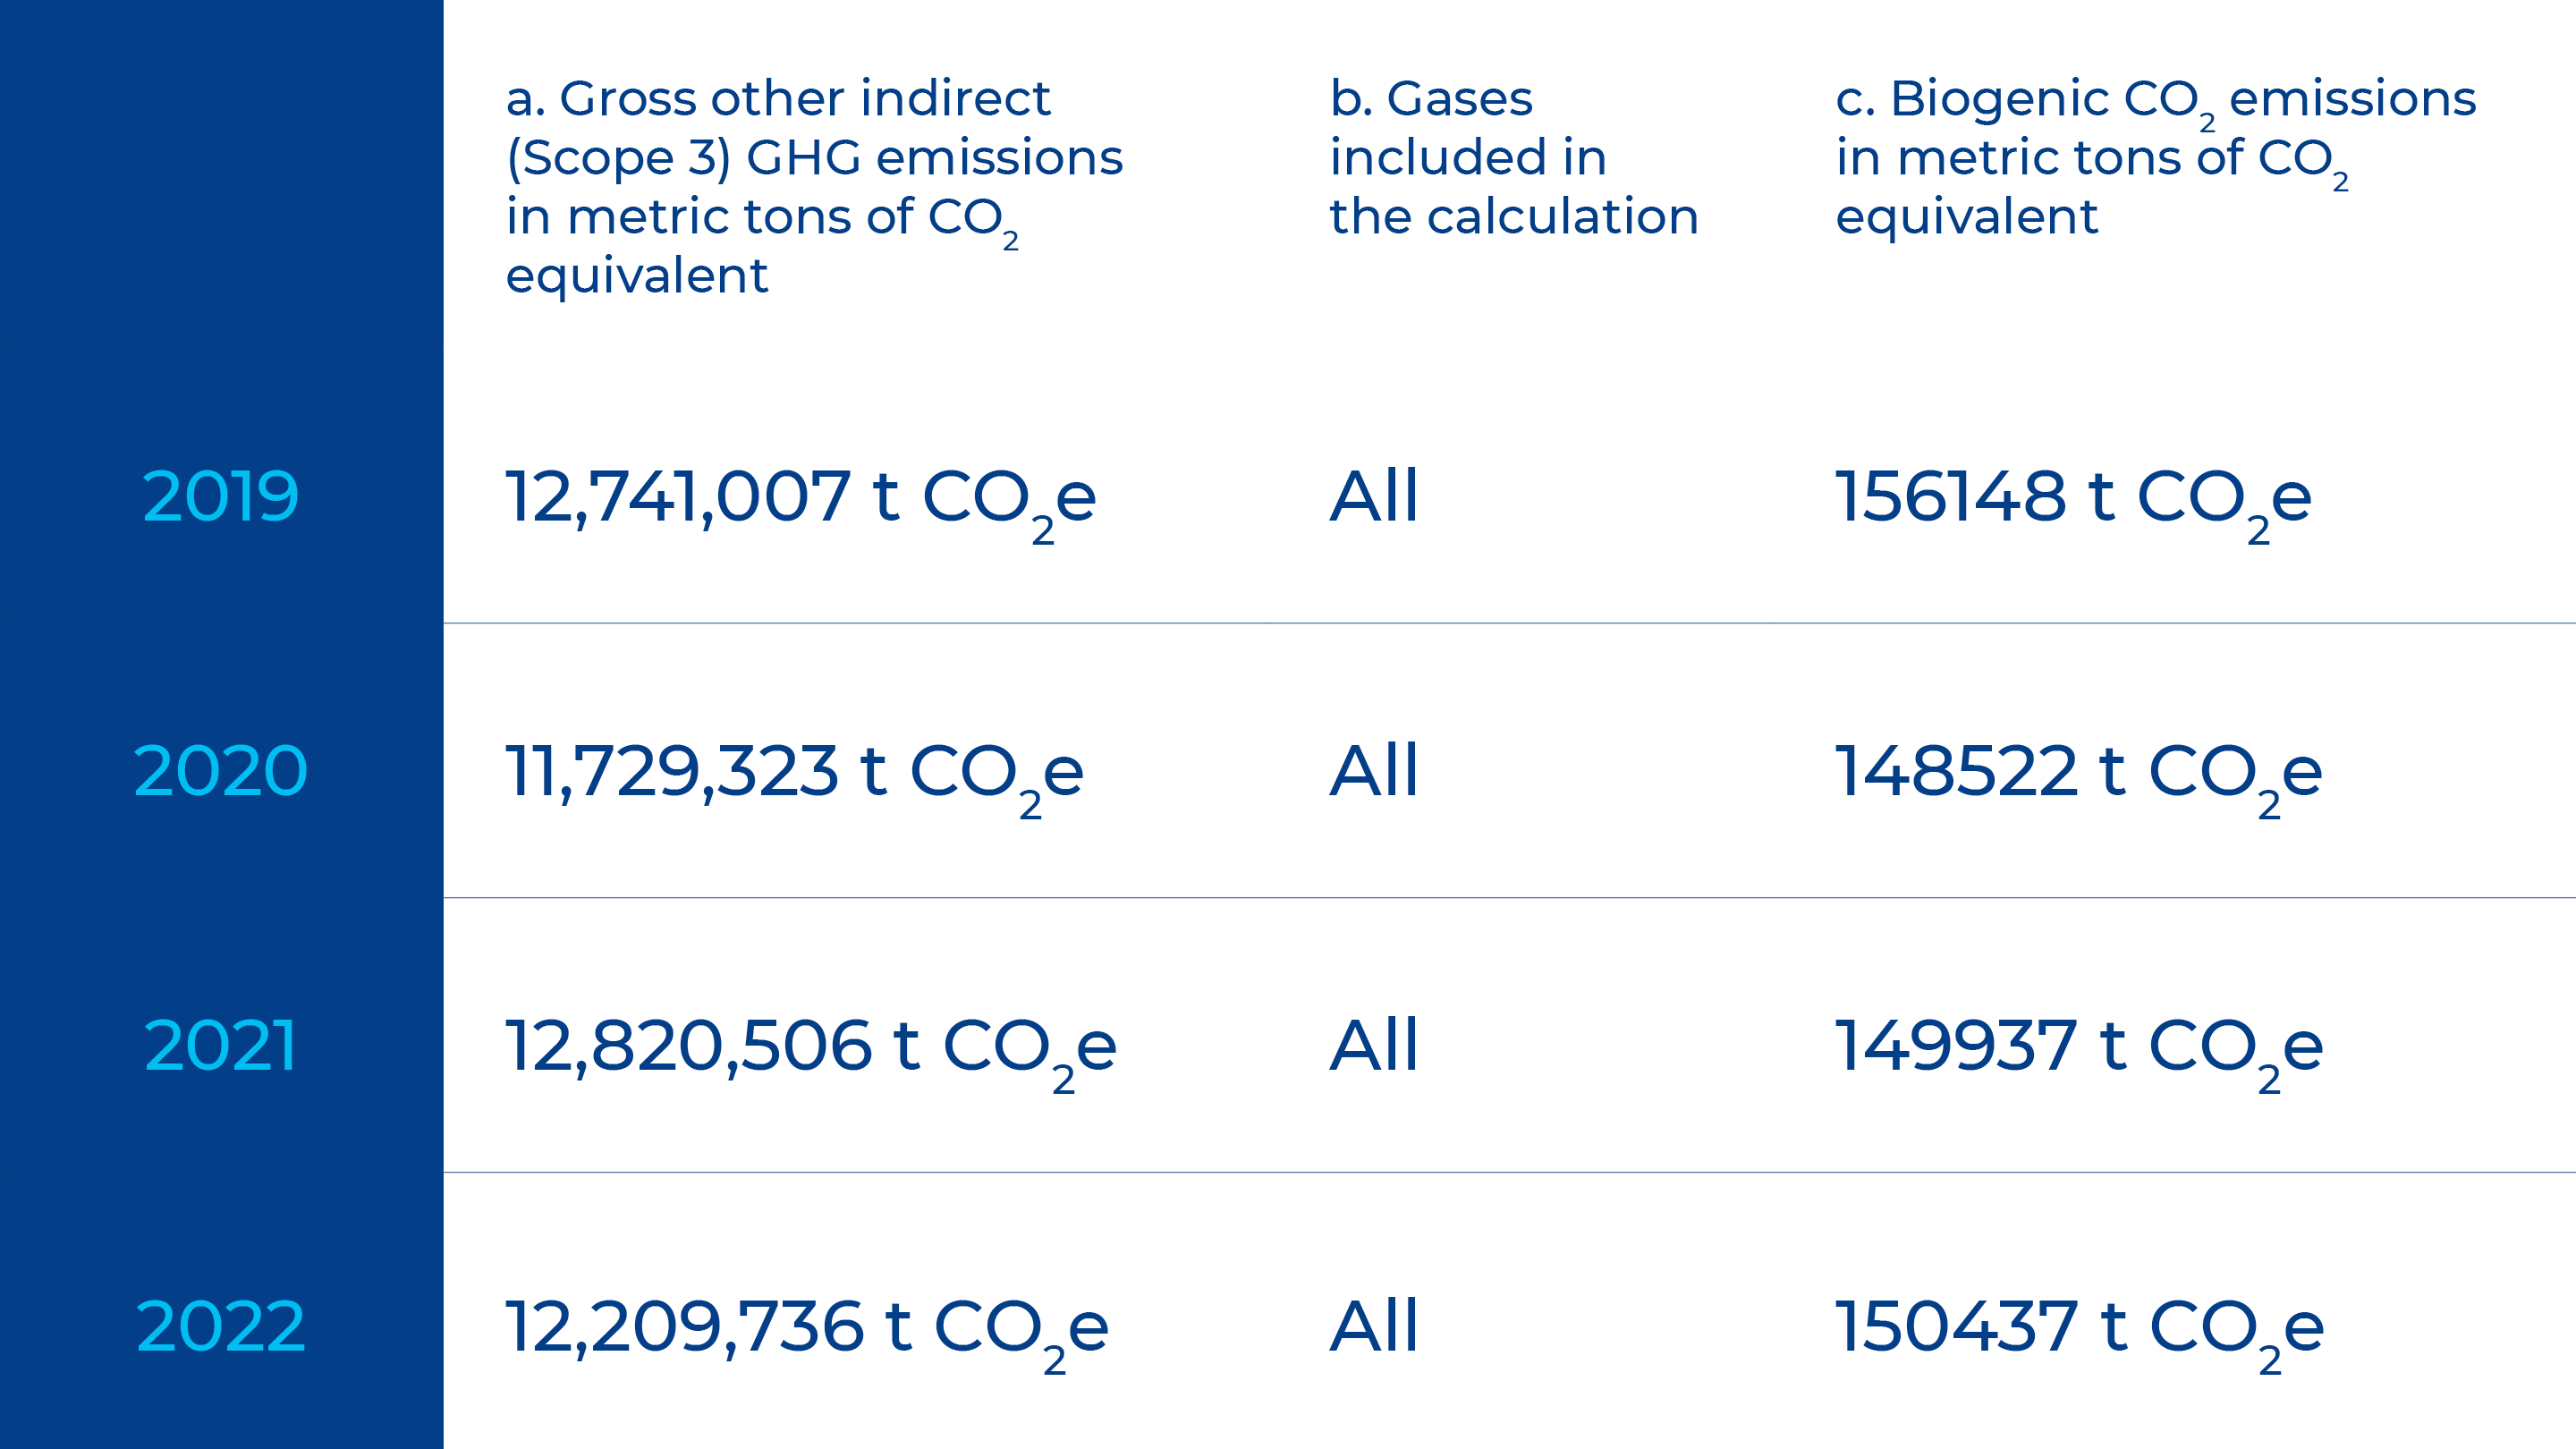 305-3 Other indirect (Scope 3) GHG emissions